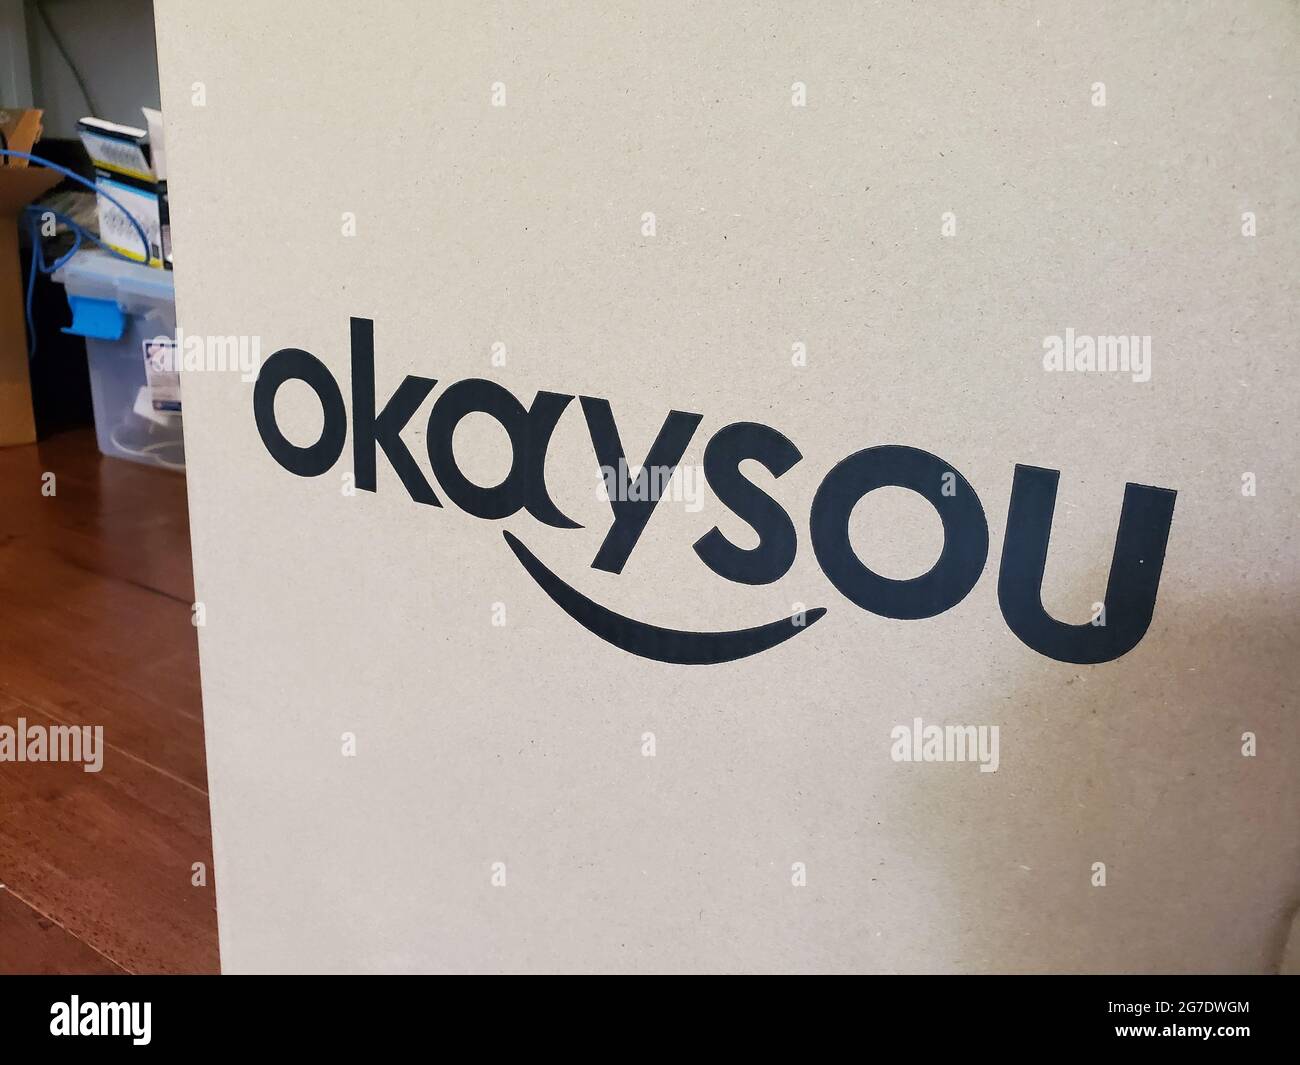 Close-up of box with logo for appliance company Okaysou, Lafayette, California, May 16, 2021. () Stock Photo